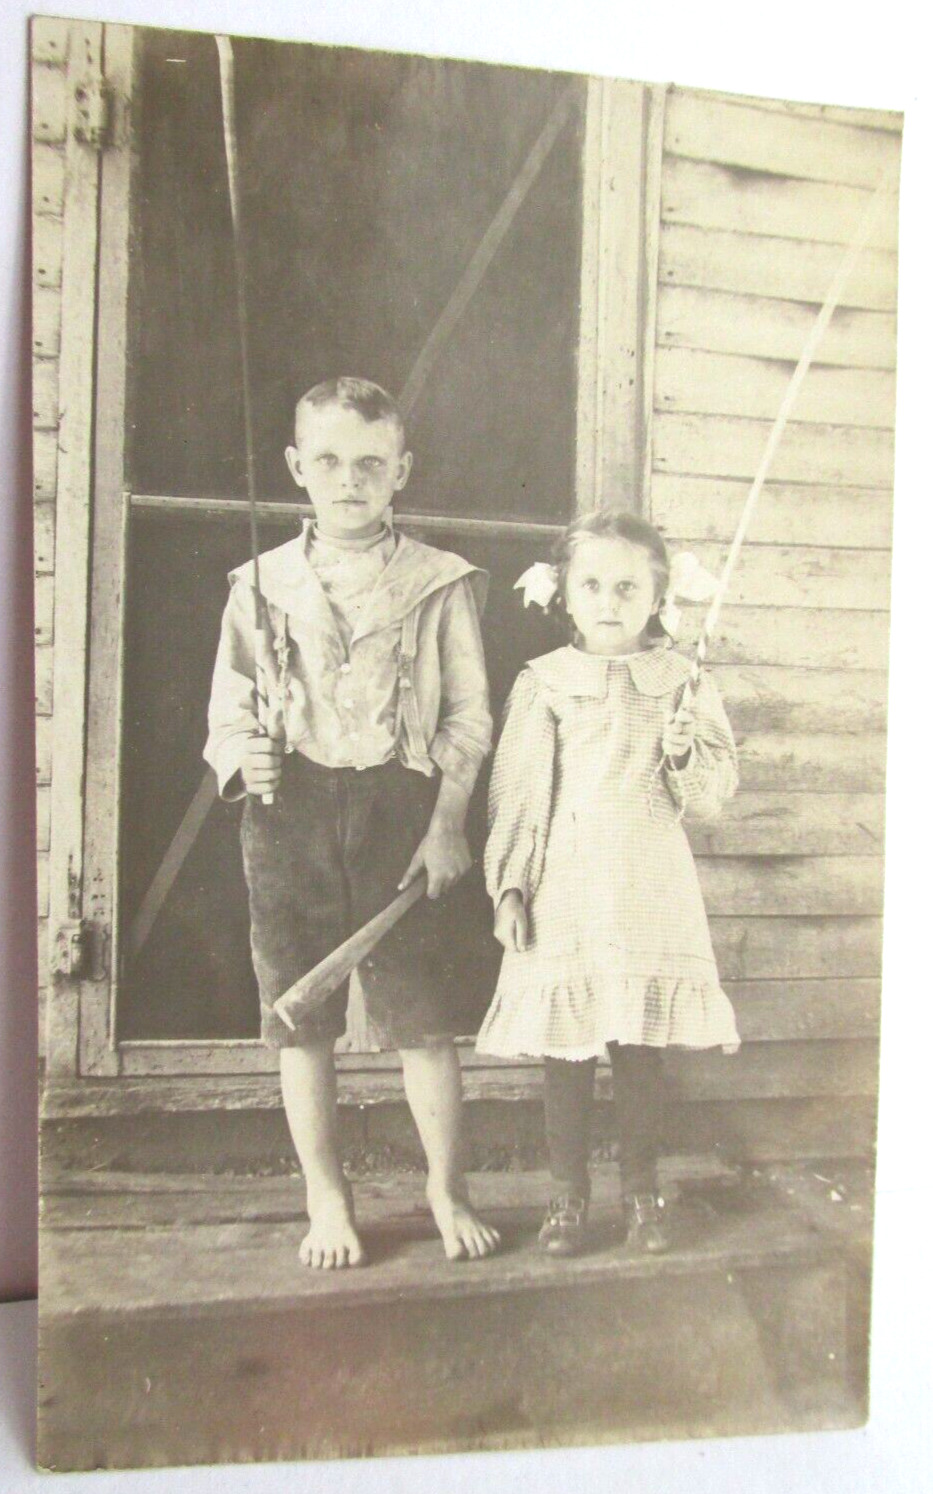 1908-12 REAL PHOTO POSTCARD RPPC Of 2 Children With Fishing Poles And Club